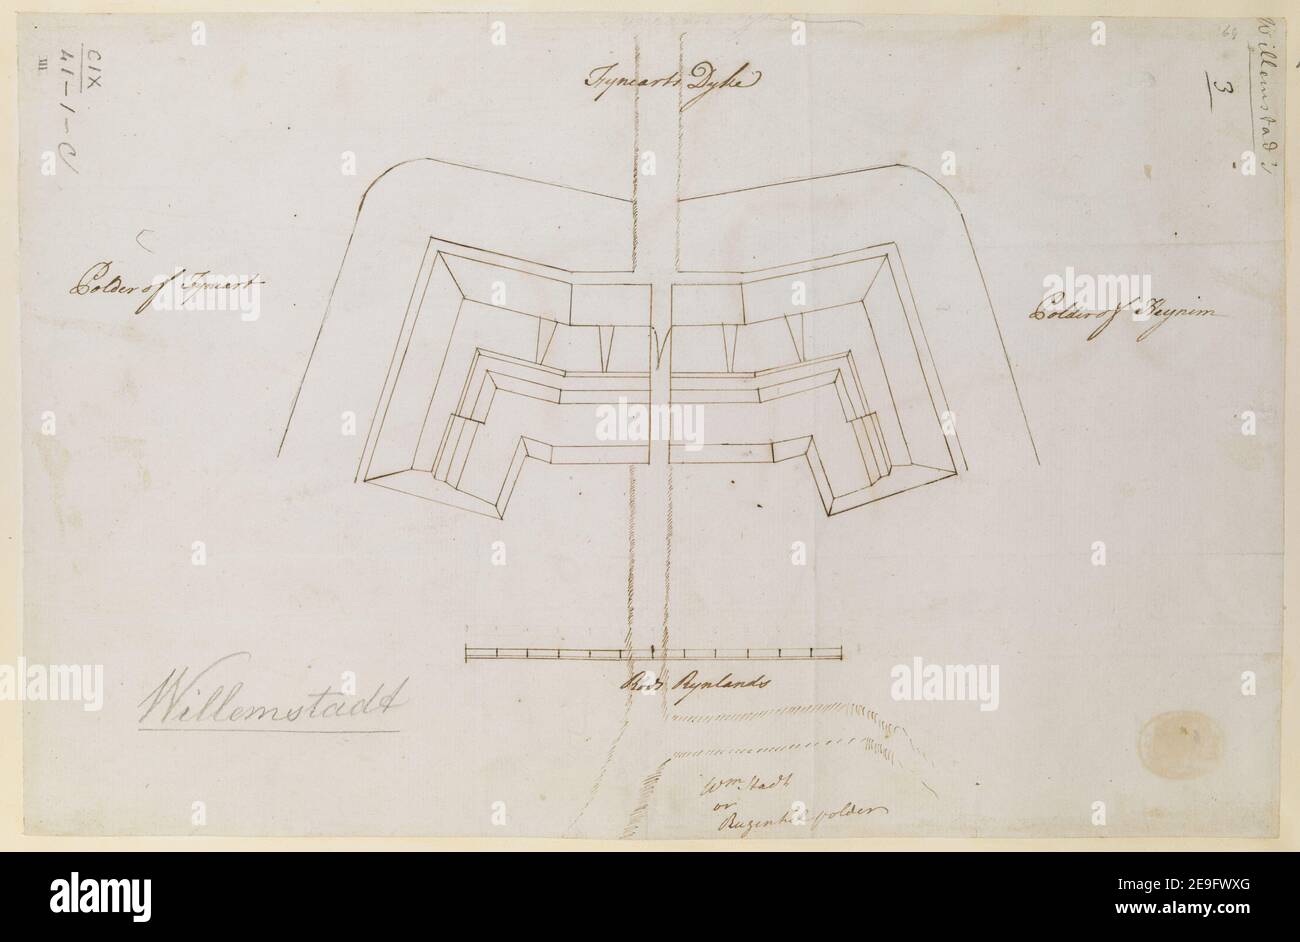 Map of Fort Hompesch . Author  Eyre, William 109.41.1.c. Date of publication: 1747 c.  Item type: 1 map Medium: pen and ink with coloured wash Dimensions: 20.3 x 31.0 cm  Former owner: George III, King of Great Britain, 1738-1820 Stock Photo